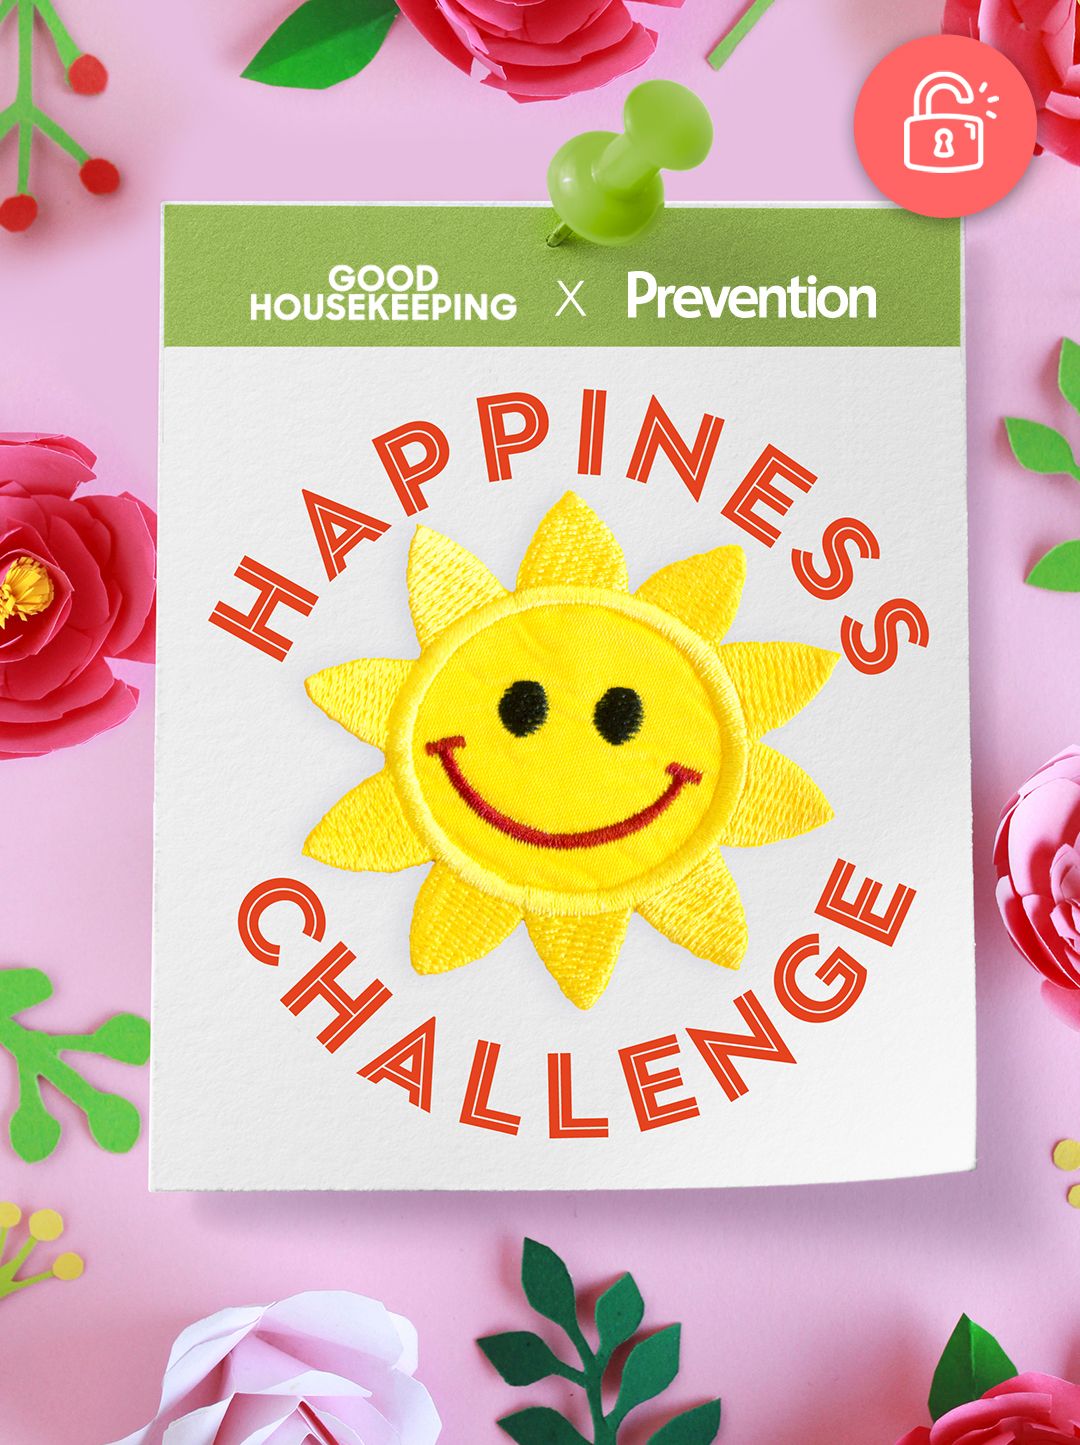 gh and prevention 14 day happiness challenge